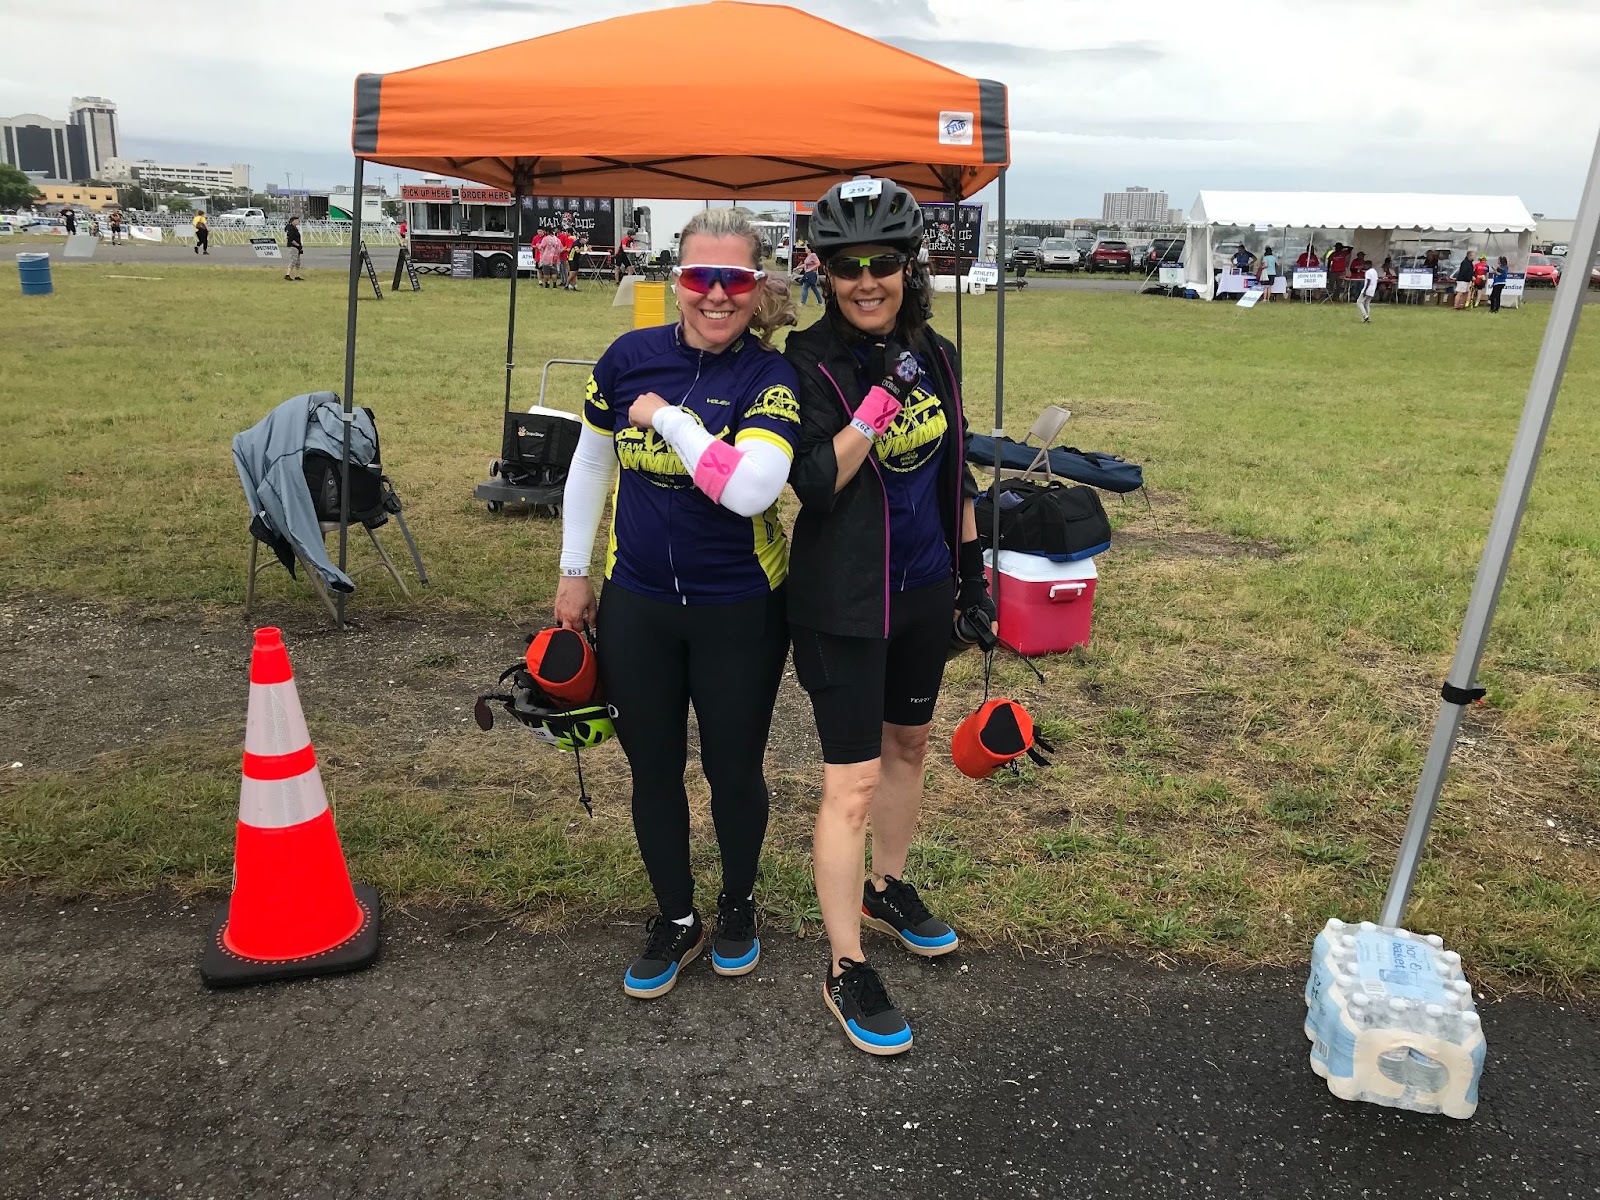 Two Team WMMR riders pose for a photograph at the end of the Bike-a-thon sporting armbands in support of breast cancer. 